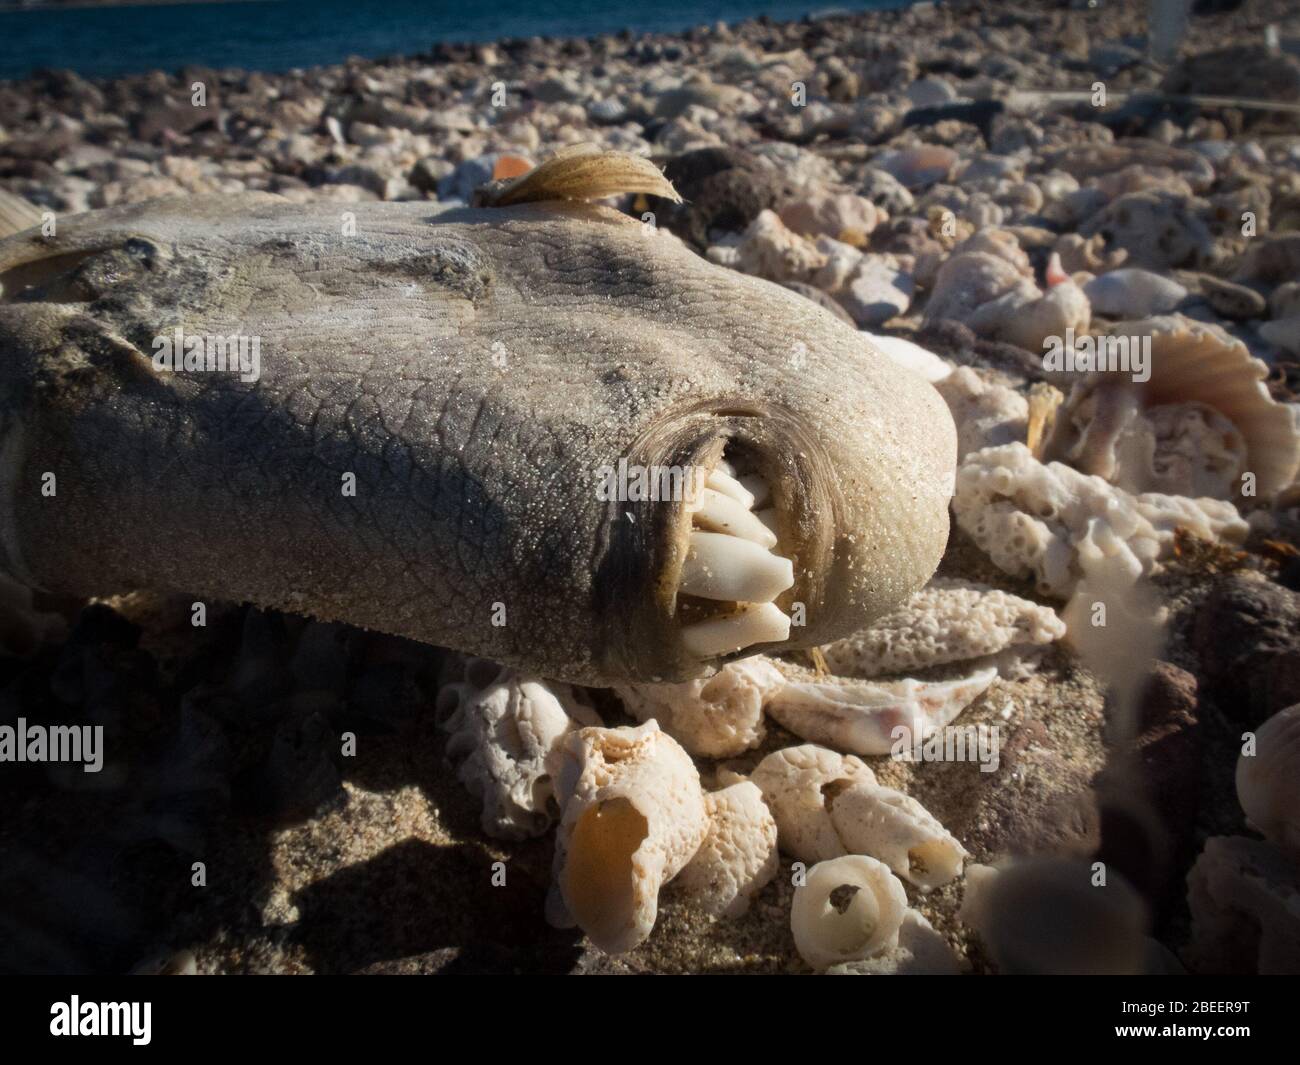 The teeth of a dead fish on a shell-covered, rocky beach on Alcatraz Island, poke out of its dry scaly skin. Stock Photo